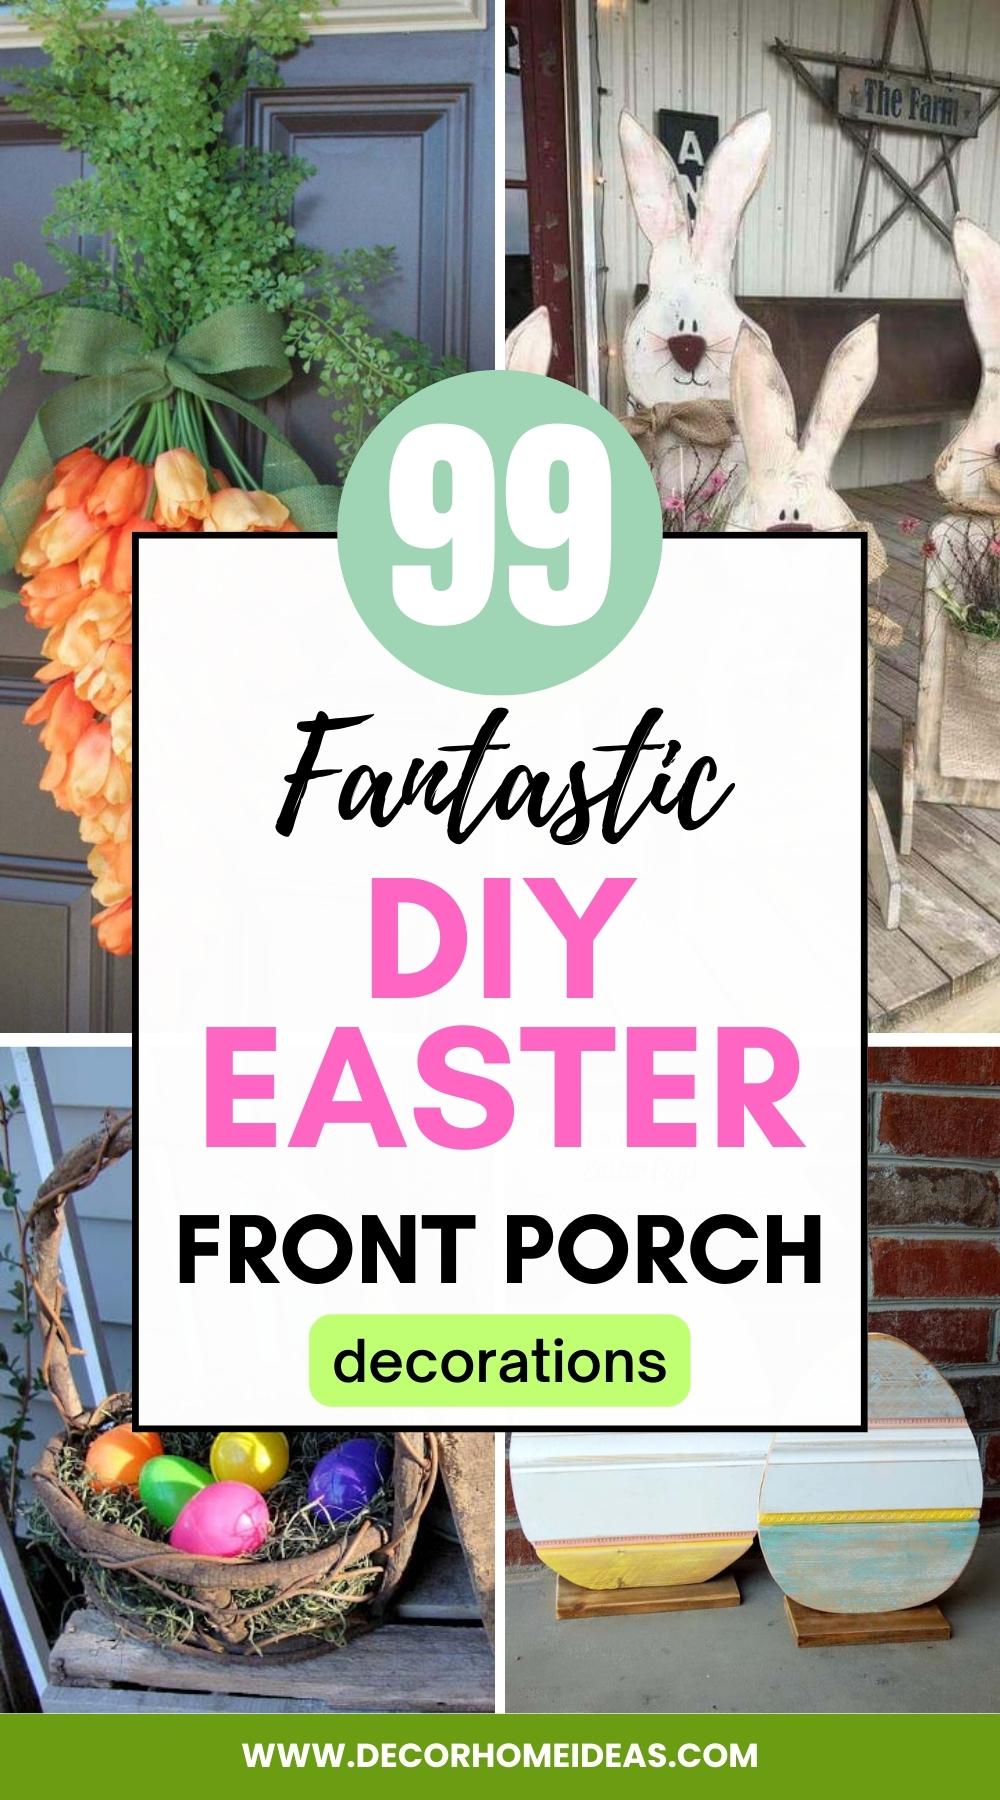 DIY Easter front porch decorations offer a fun and creative way to welcome spring and the holiday season. From wreaths to planters to signs, there are endless possibilities to add a festive touch to your front porch, creating a cheerful and inviting entryway for your family and guests.